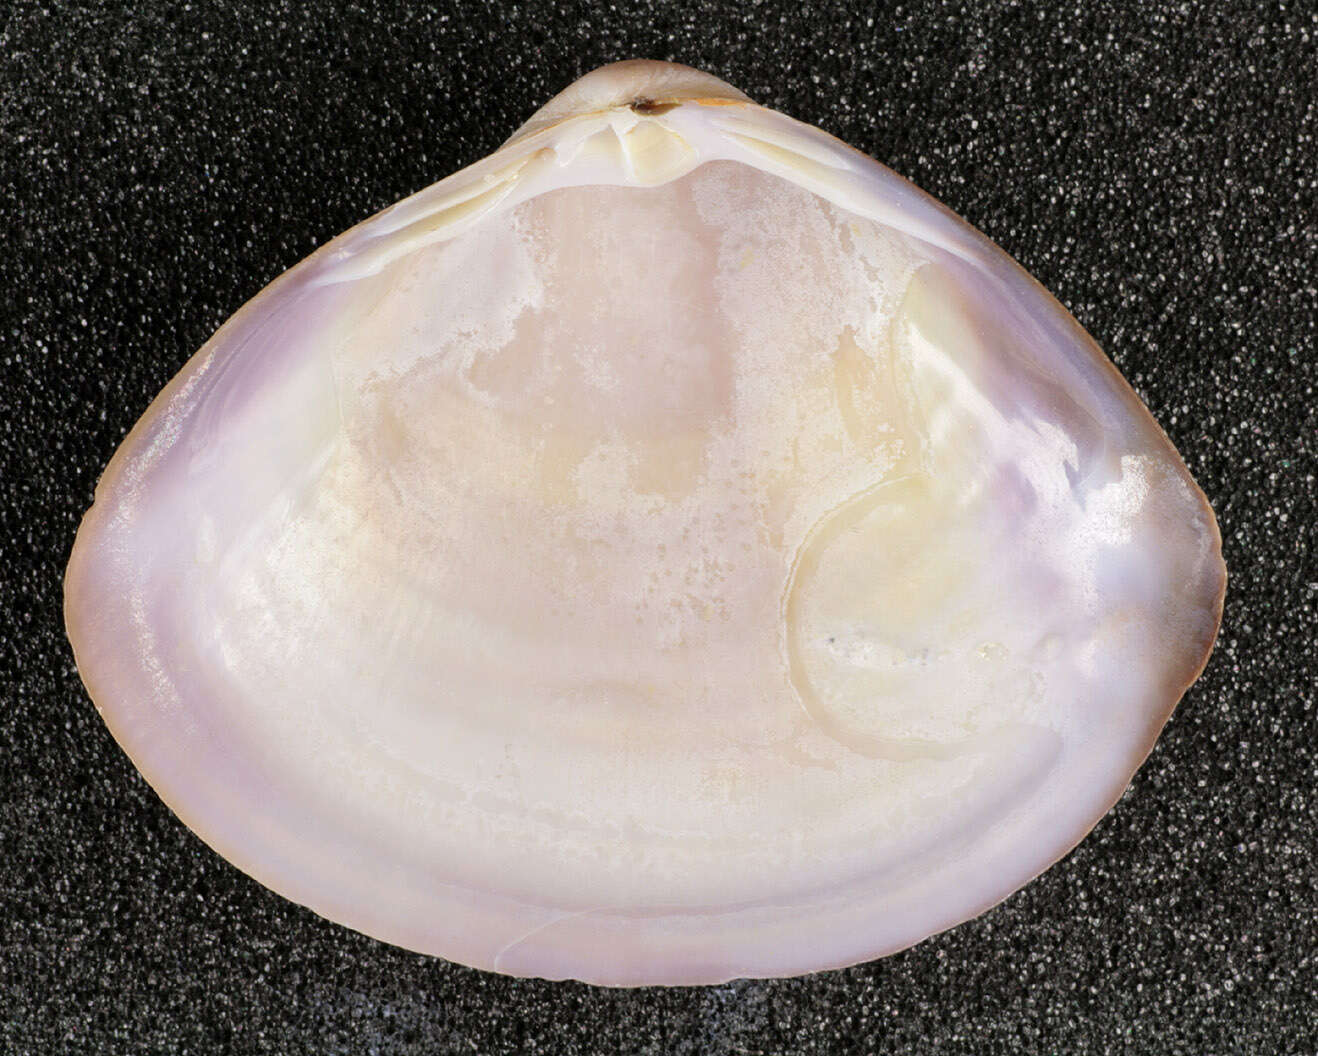 Image of rayed trough clam